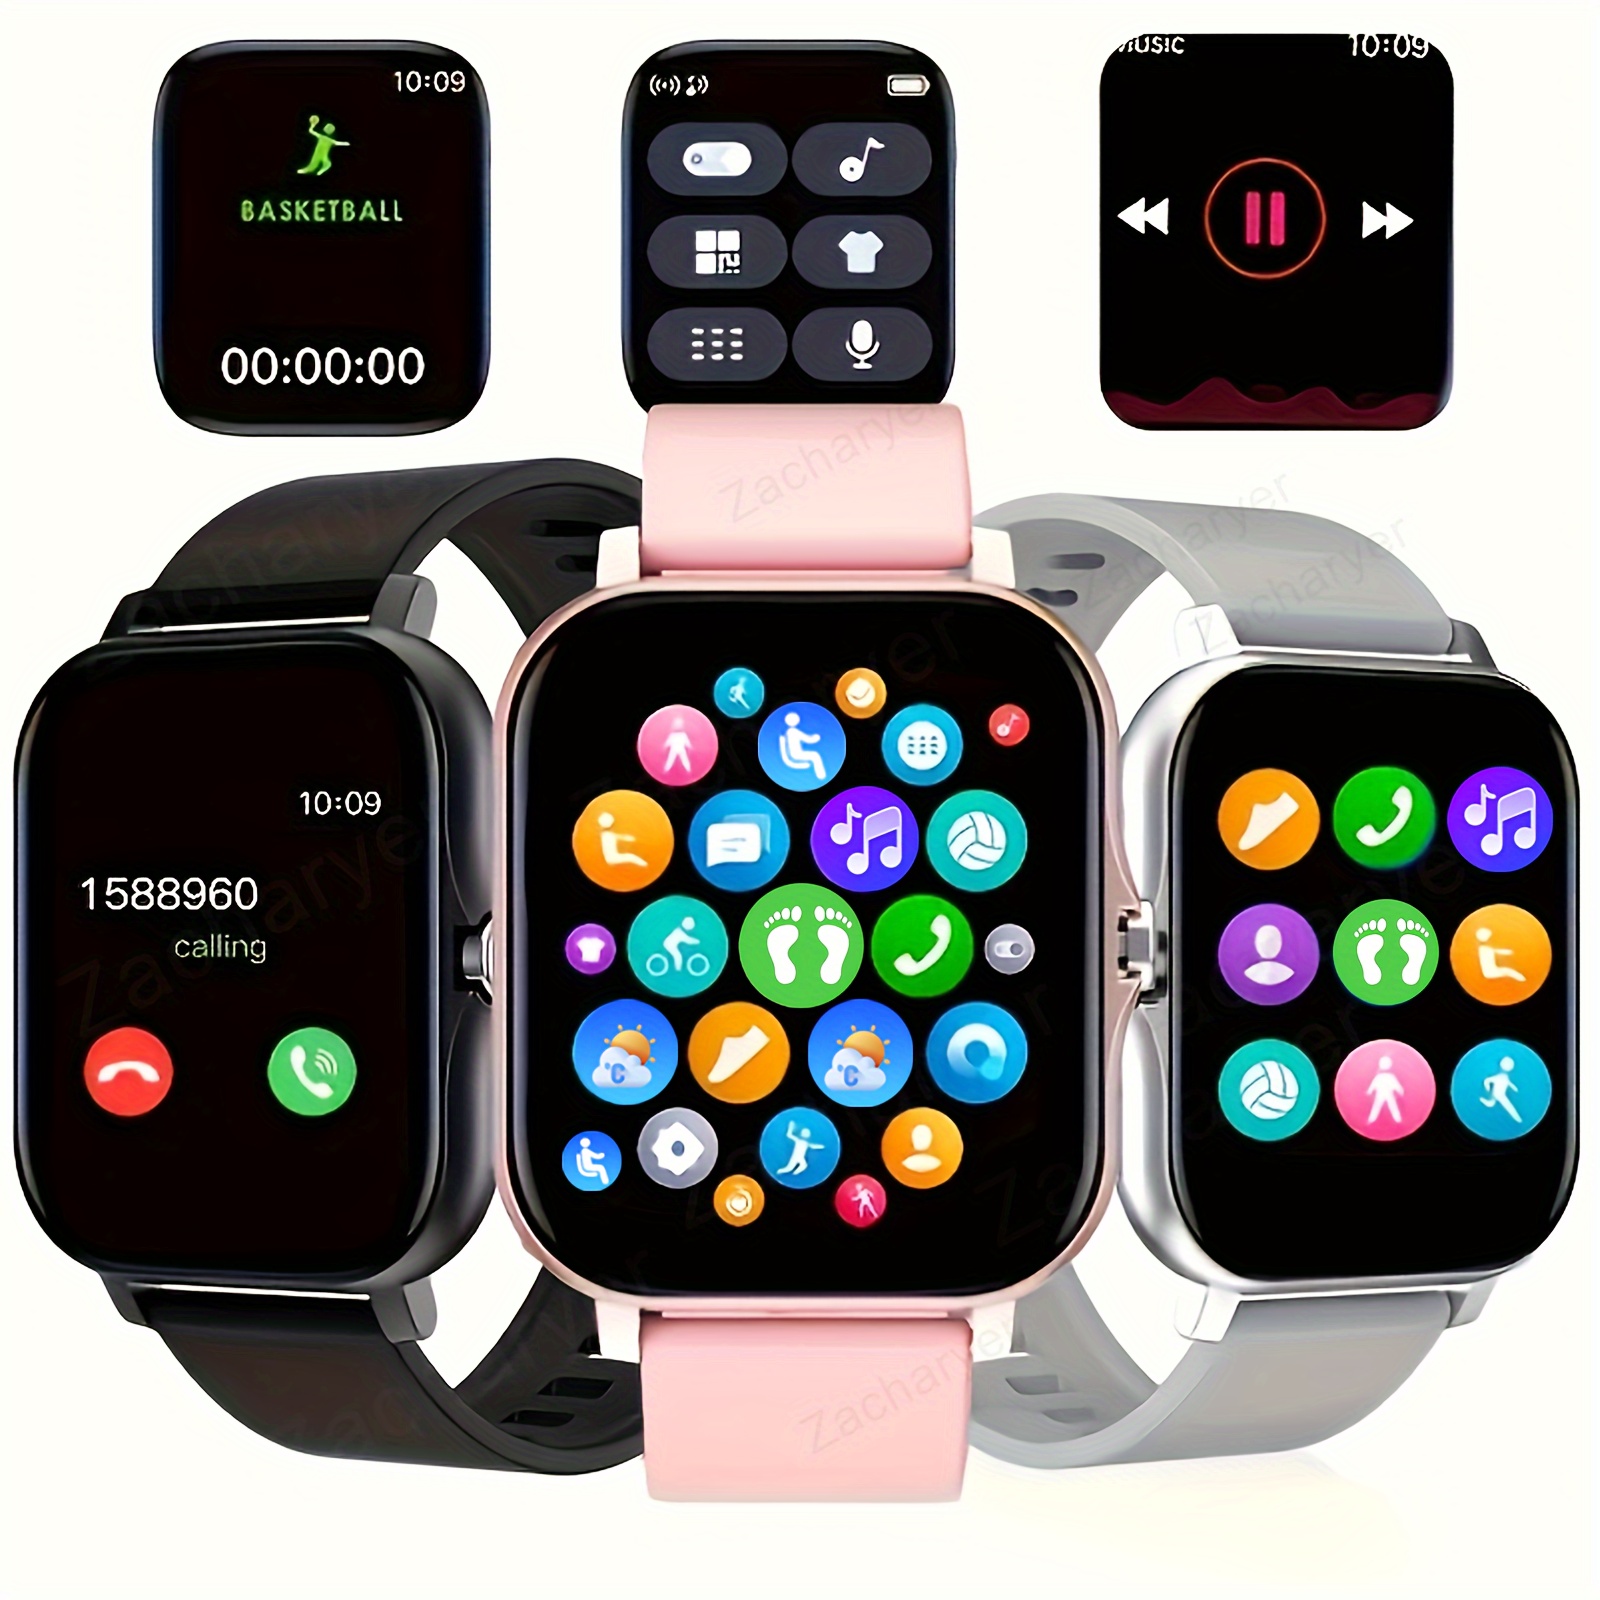 

Smart Watch With Wireless Calling, Call Reminders, Music Control, Compatible With Android And Iphone Systems.